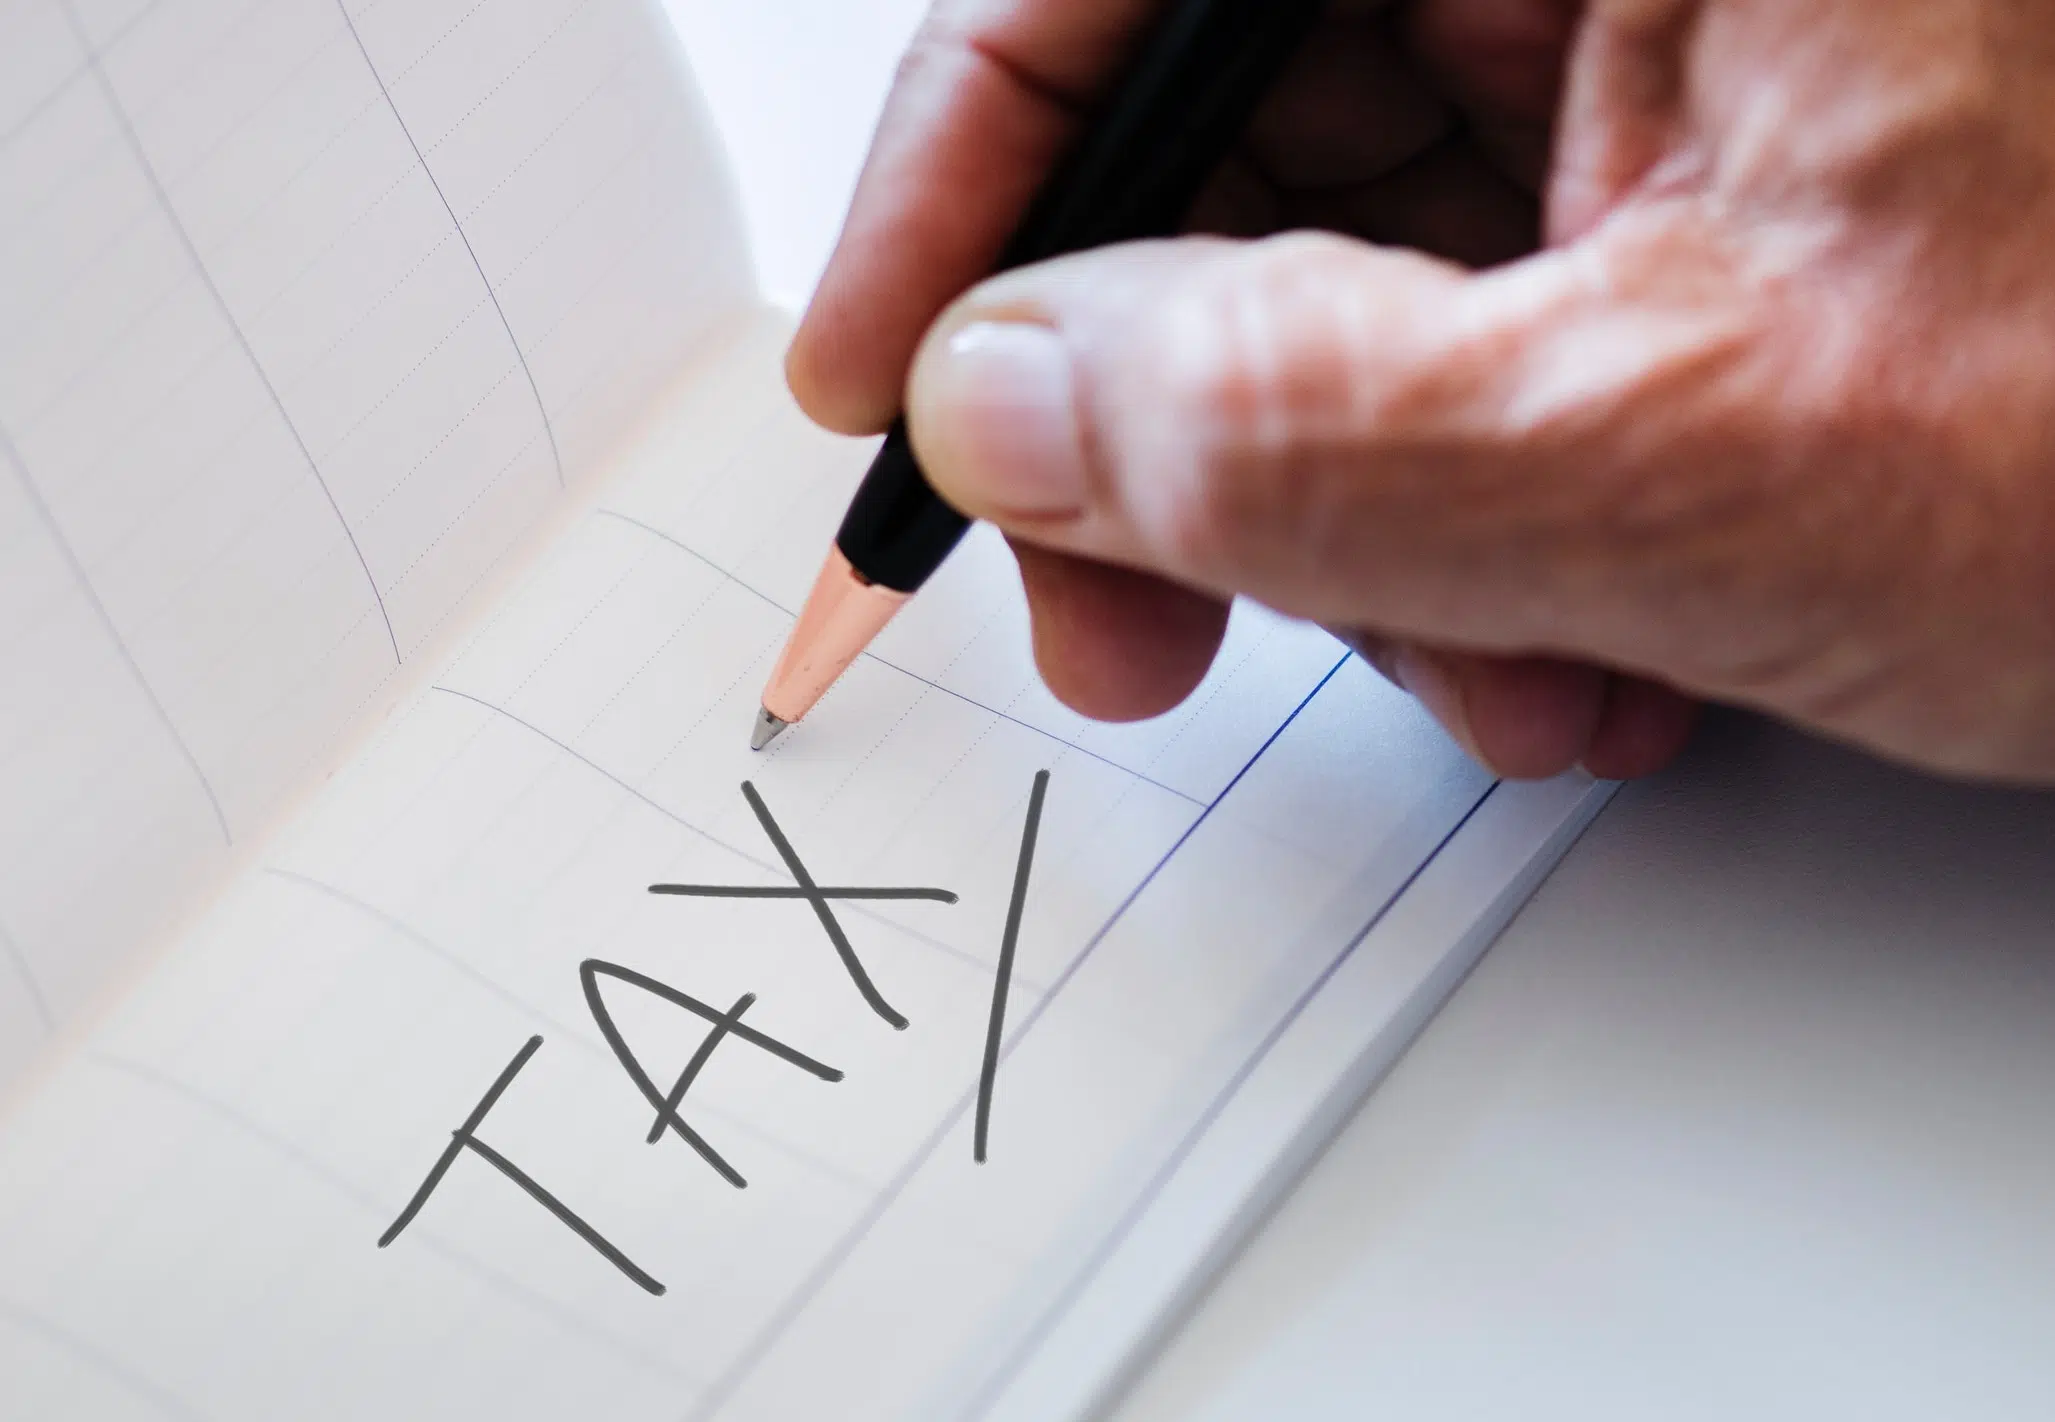 City of Ord Sales Tax Increase Effective April 1, 2019.